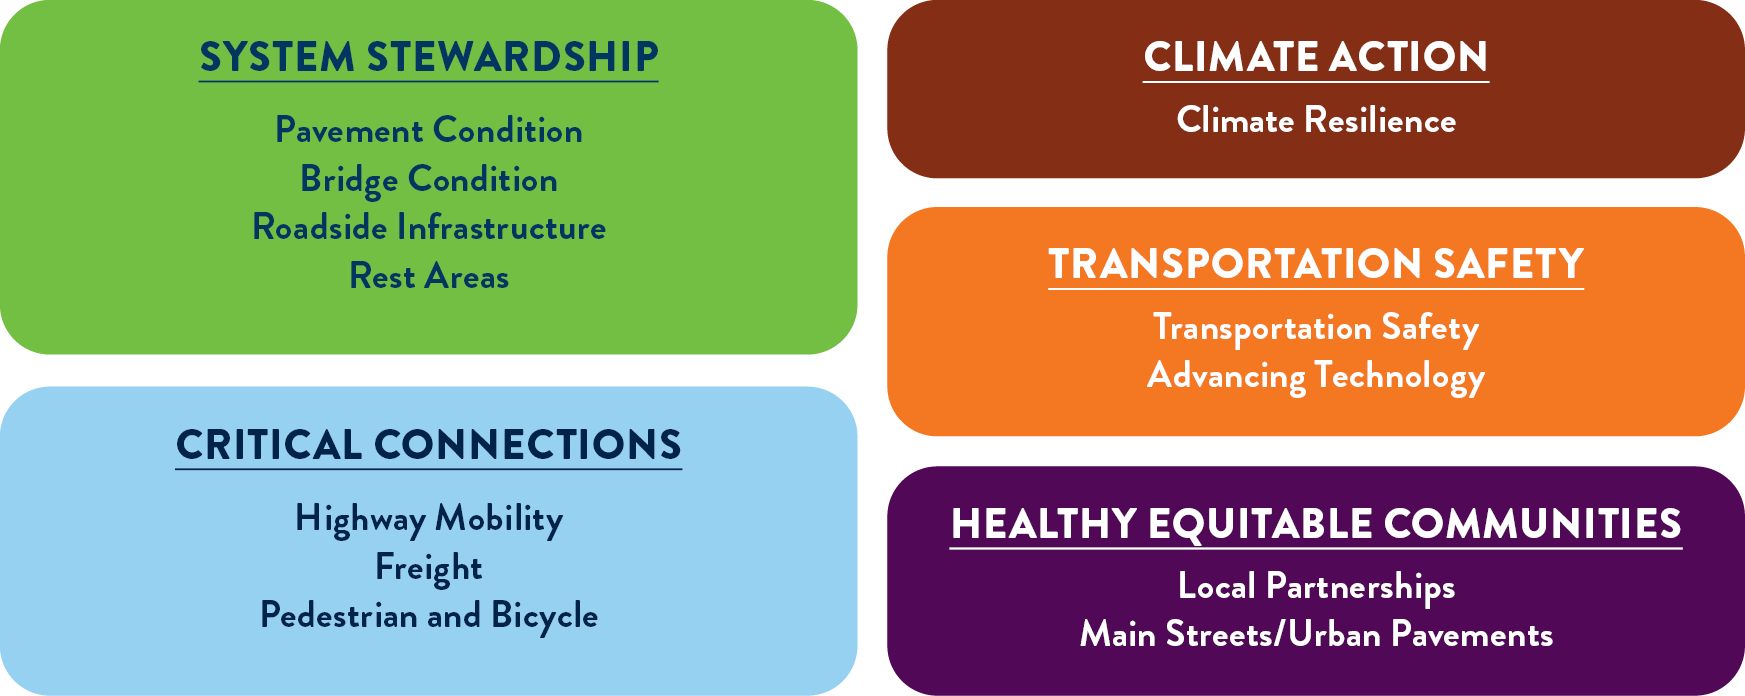 System Stewardship: Pavement Condition, Bridge Condition, Roadside Infrastructure Critical Connections: Highway Mobility, Freight, Pedestrian and Bicycle Climate Action: Climate Resilience Transportation Safety: Transportation Safety, Advancing Technology Healthy Equitable Communities: Local Partnerships, Main Streets/urban Pavements 